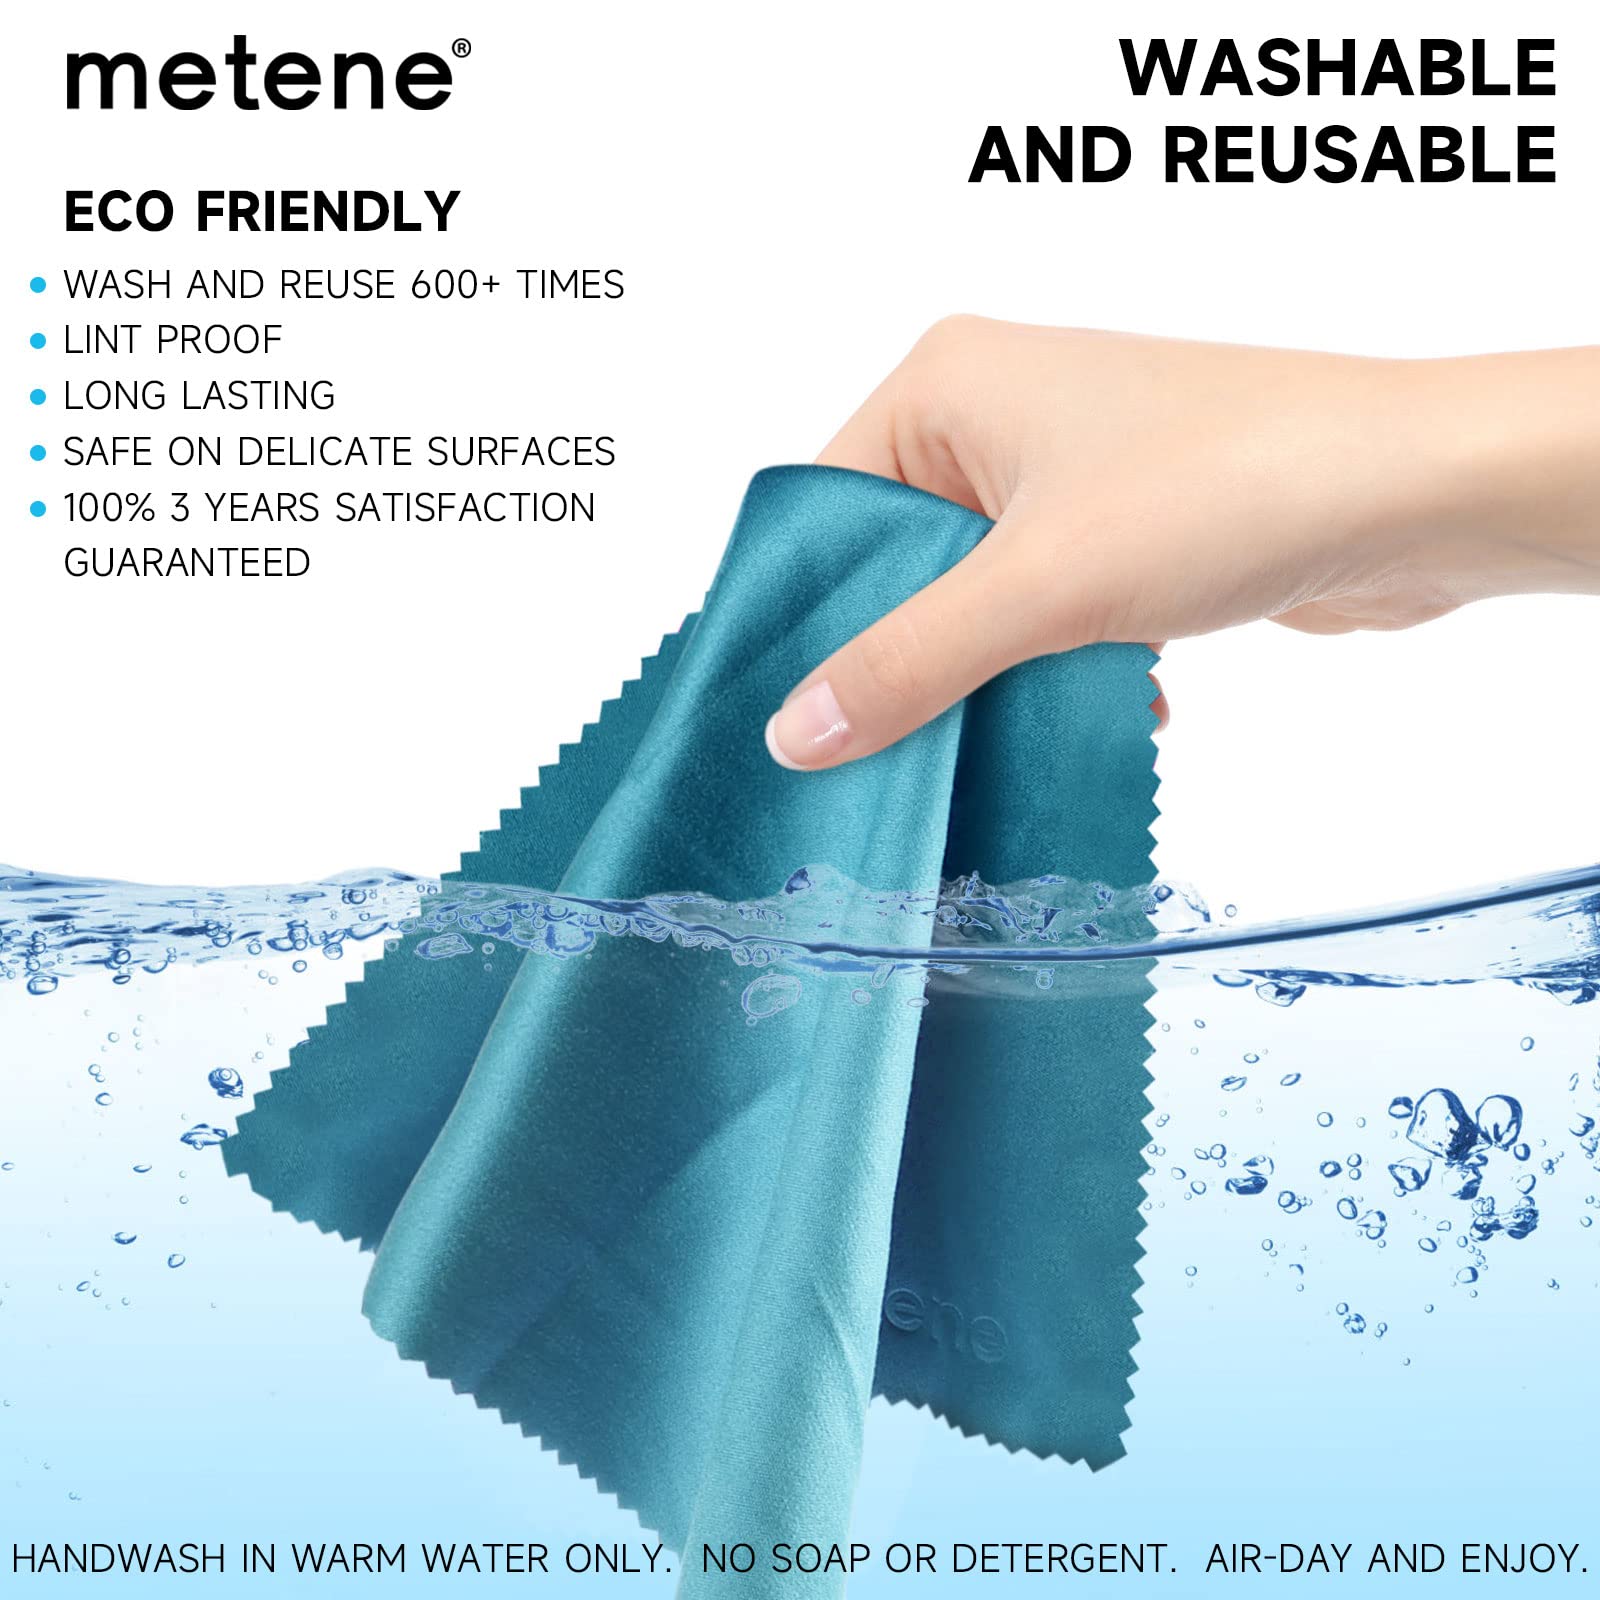 Metene 15 Pack Microfiber Cleaning Cloths (6"x7") in Individual Vinyl Pouches | Glasses Cleaning Cloth for Eyeglasses, Phone, Screens, Camera Lens and Other Delicate Surfaces Cleaner (Blue)